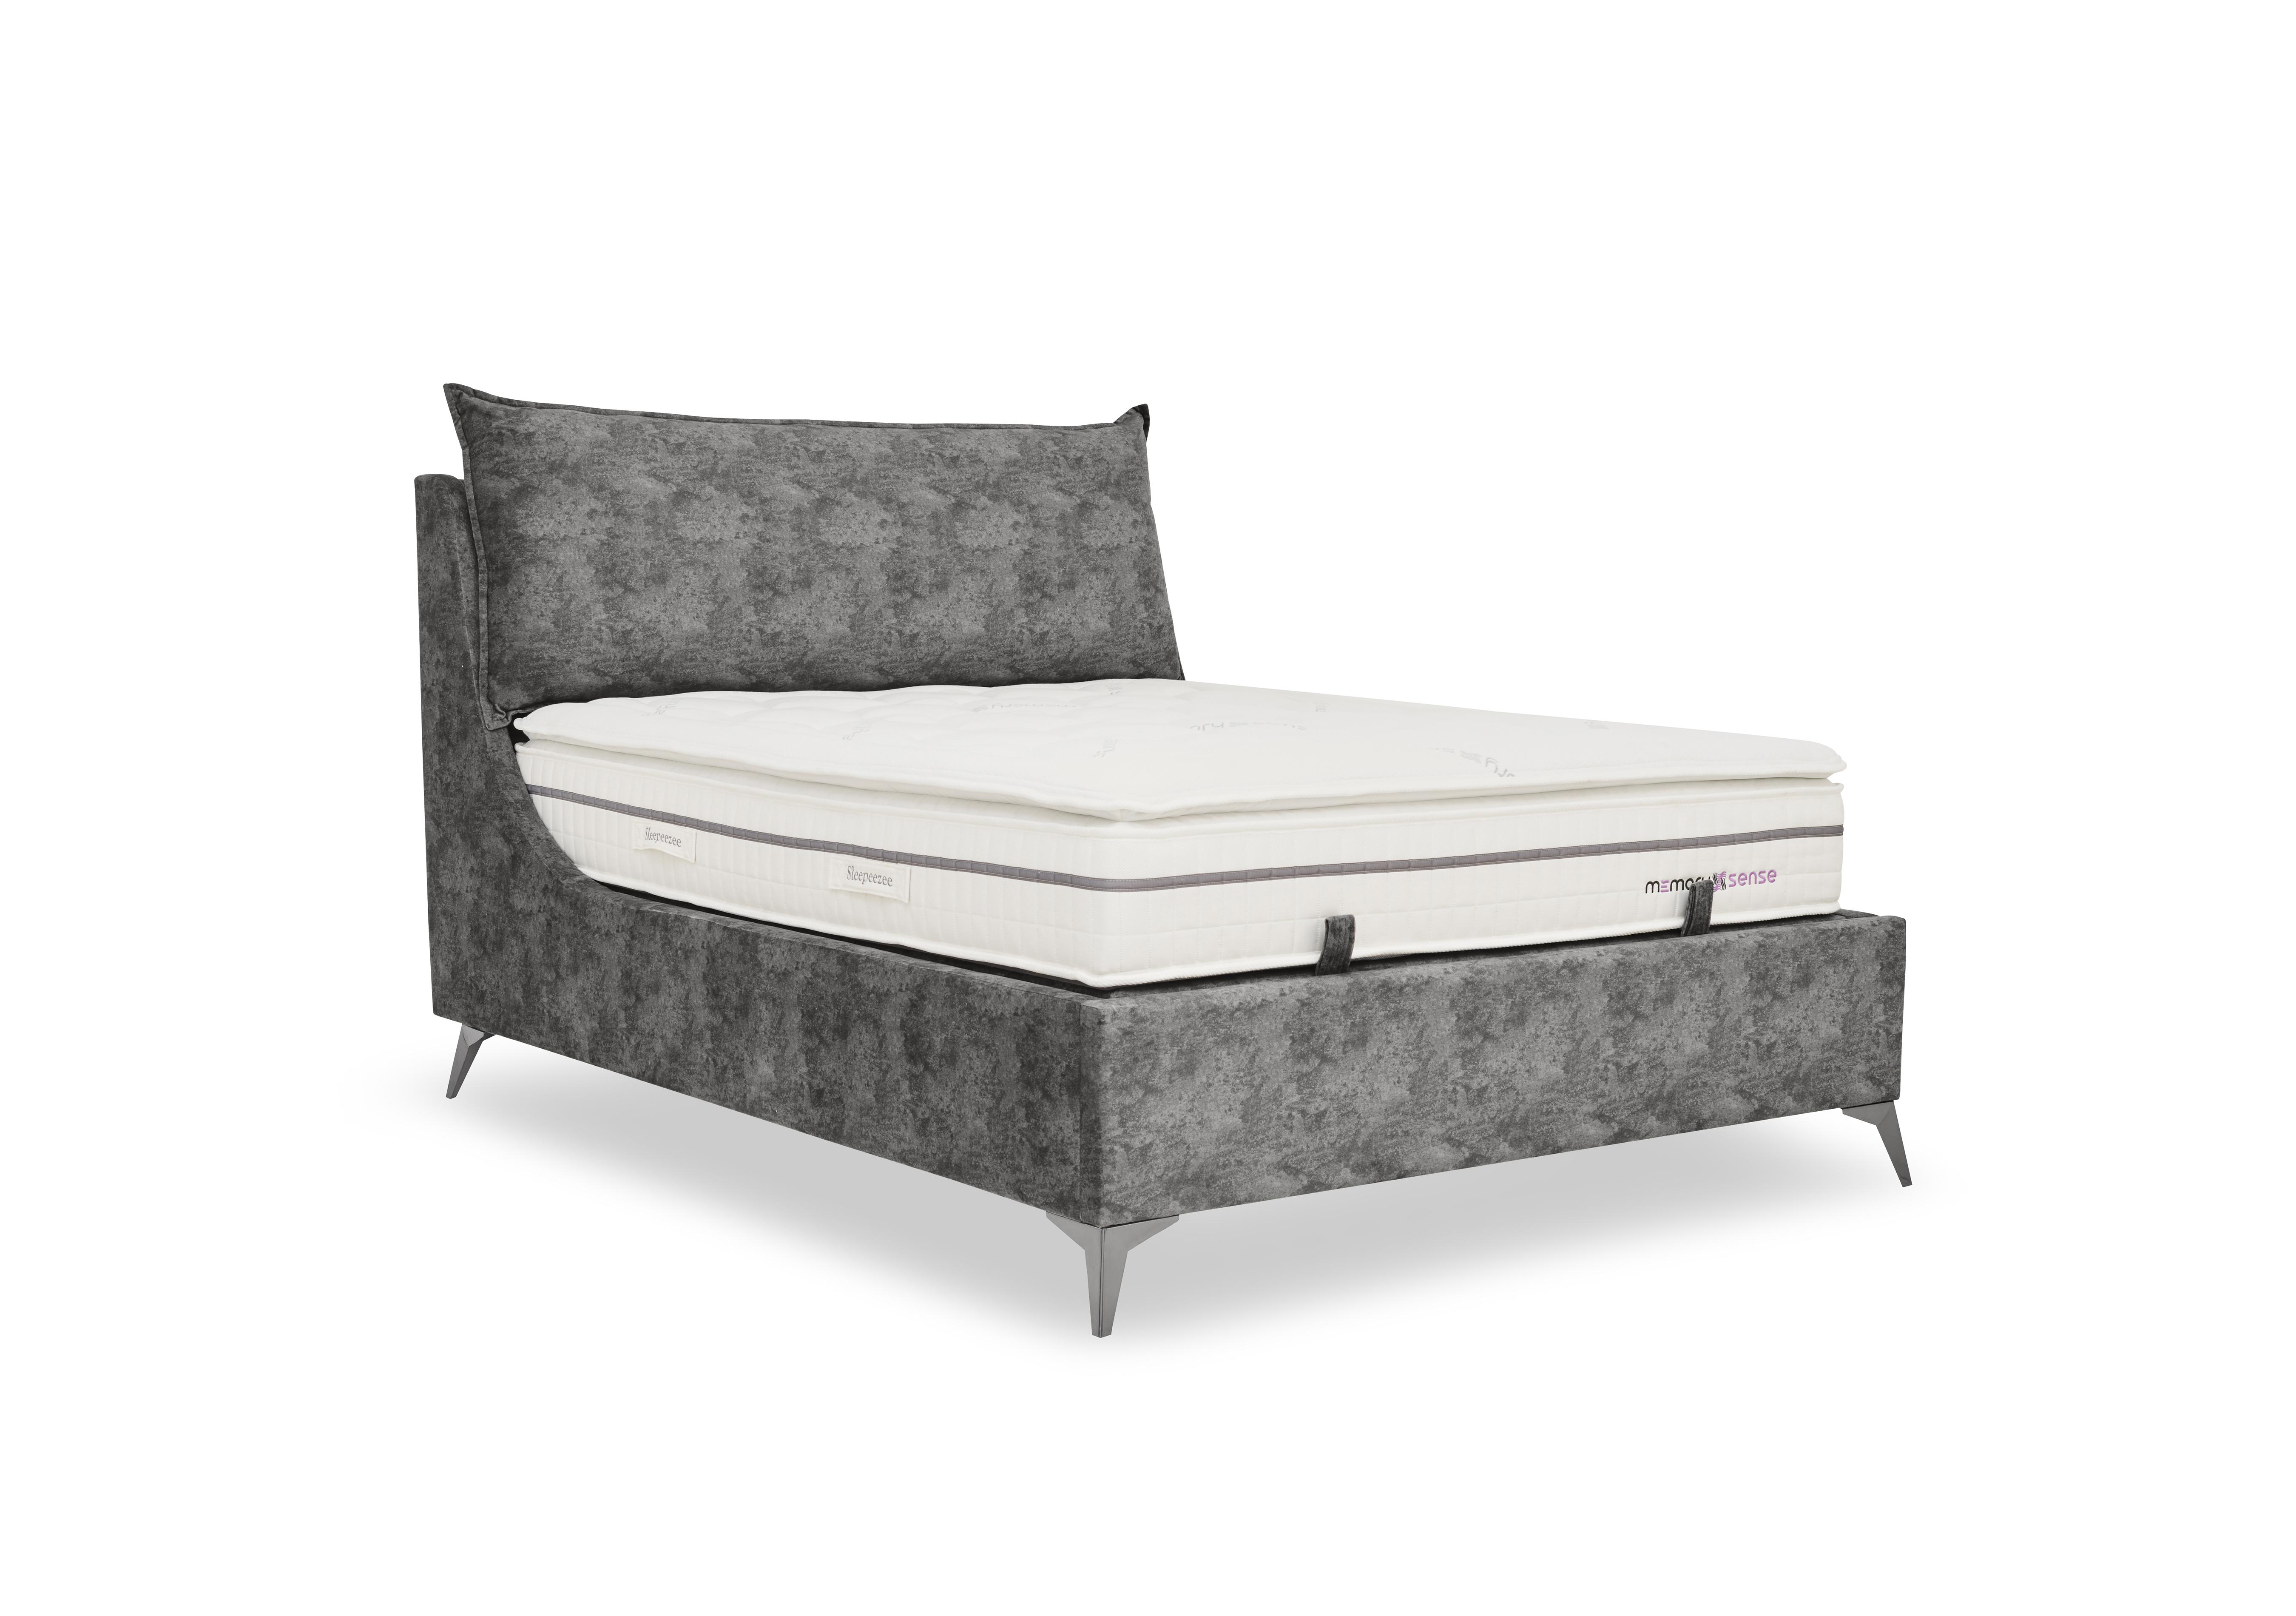 Sanctuary Ottoman Bed Frame in Tampa Grey on Furniture Village